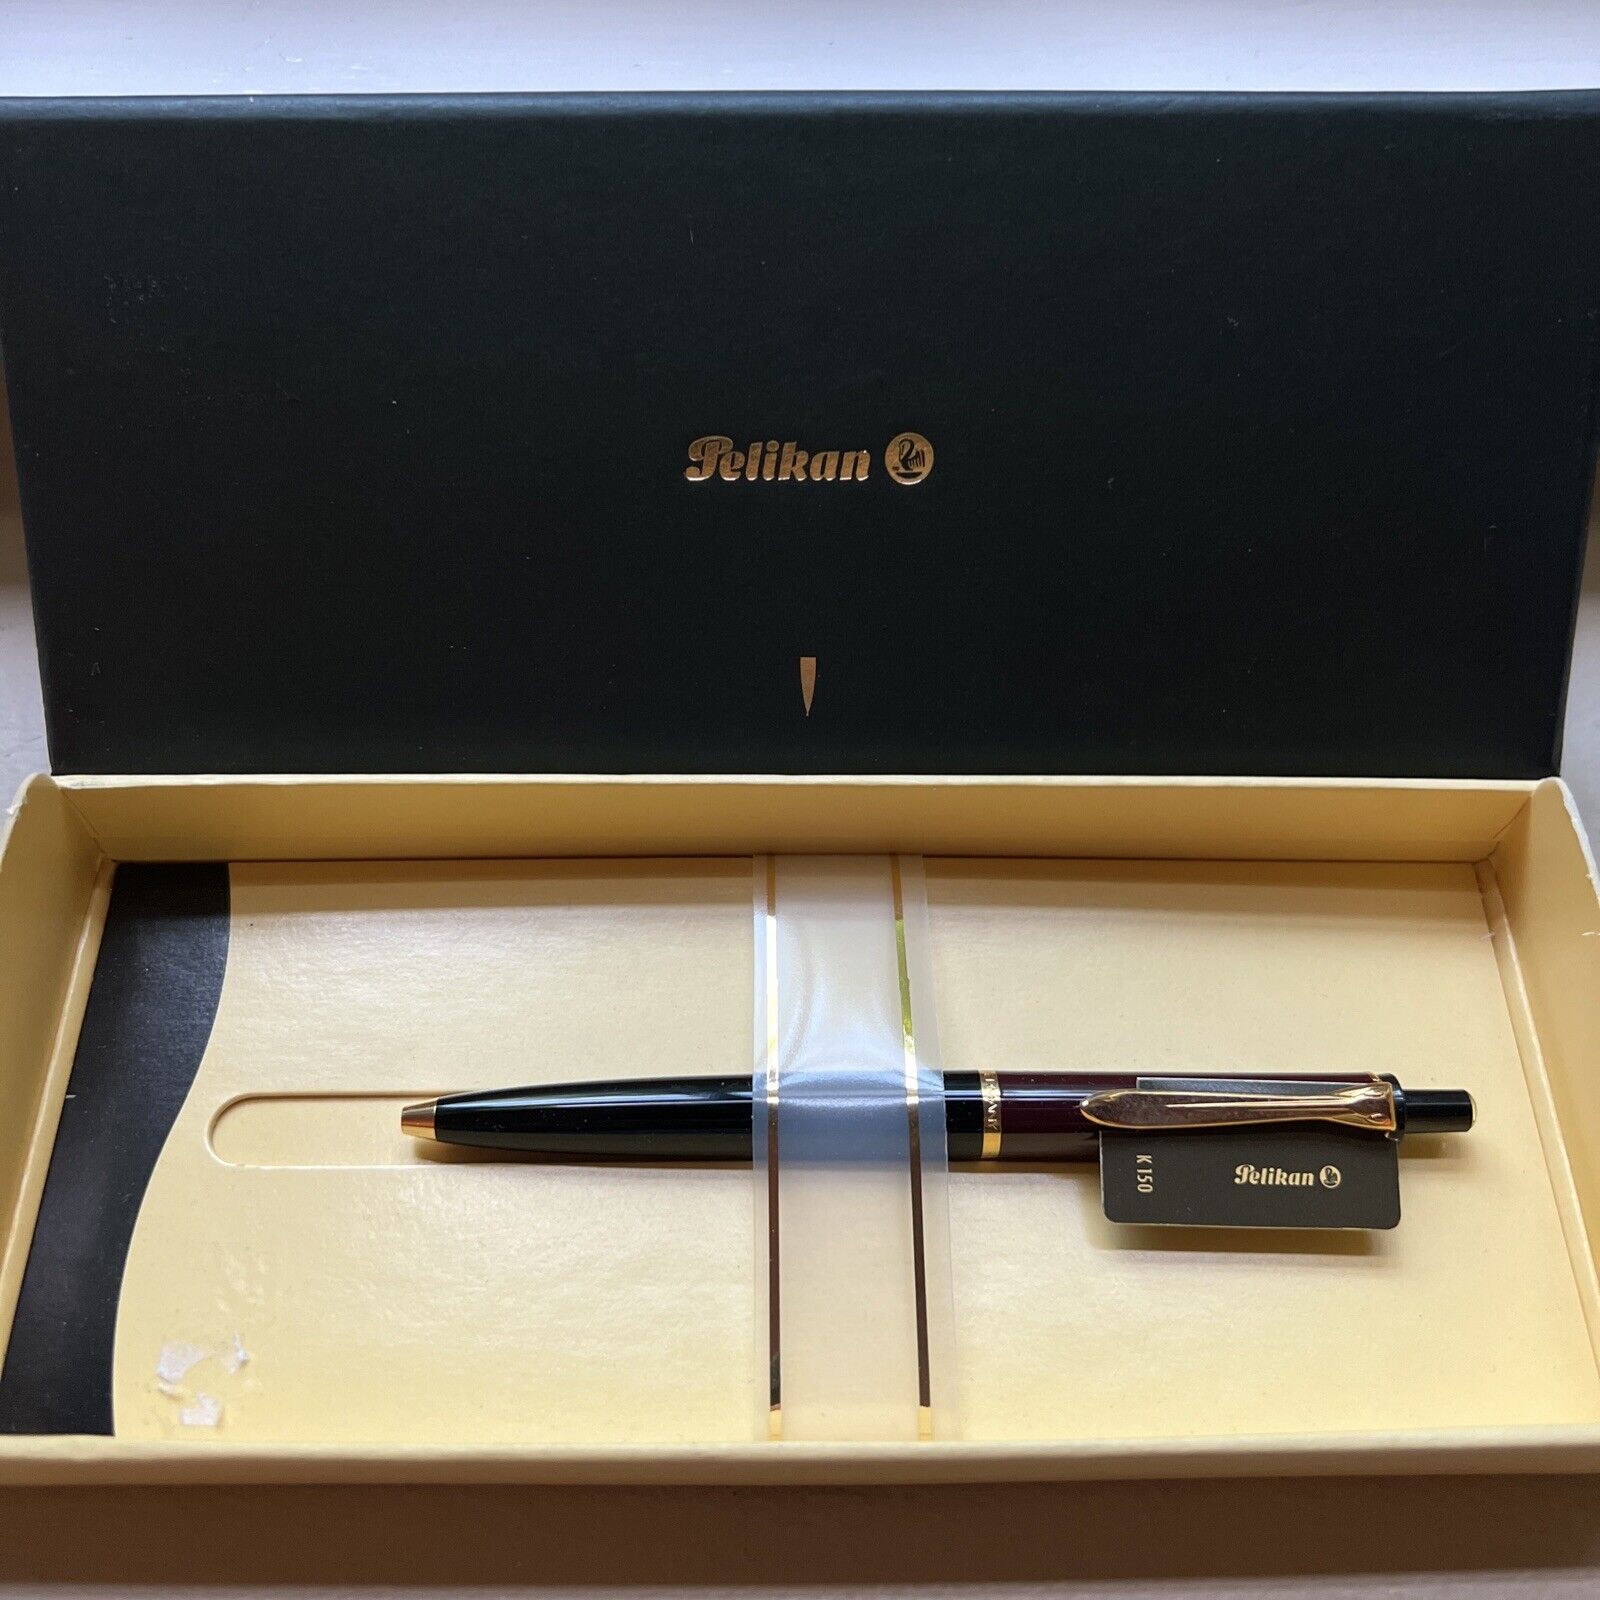 Pelikan Classic K150 Ball Pen - Black and Red with Gold Trim